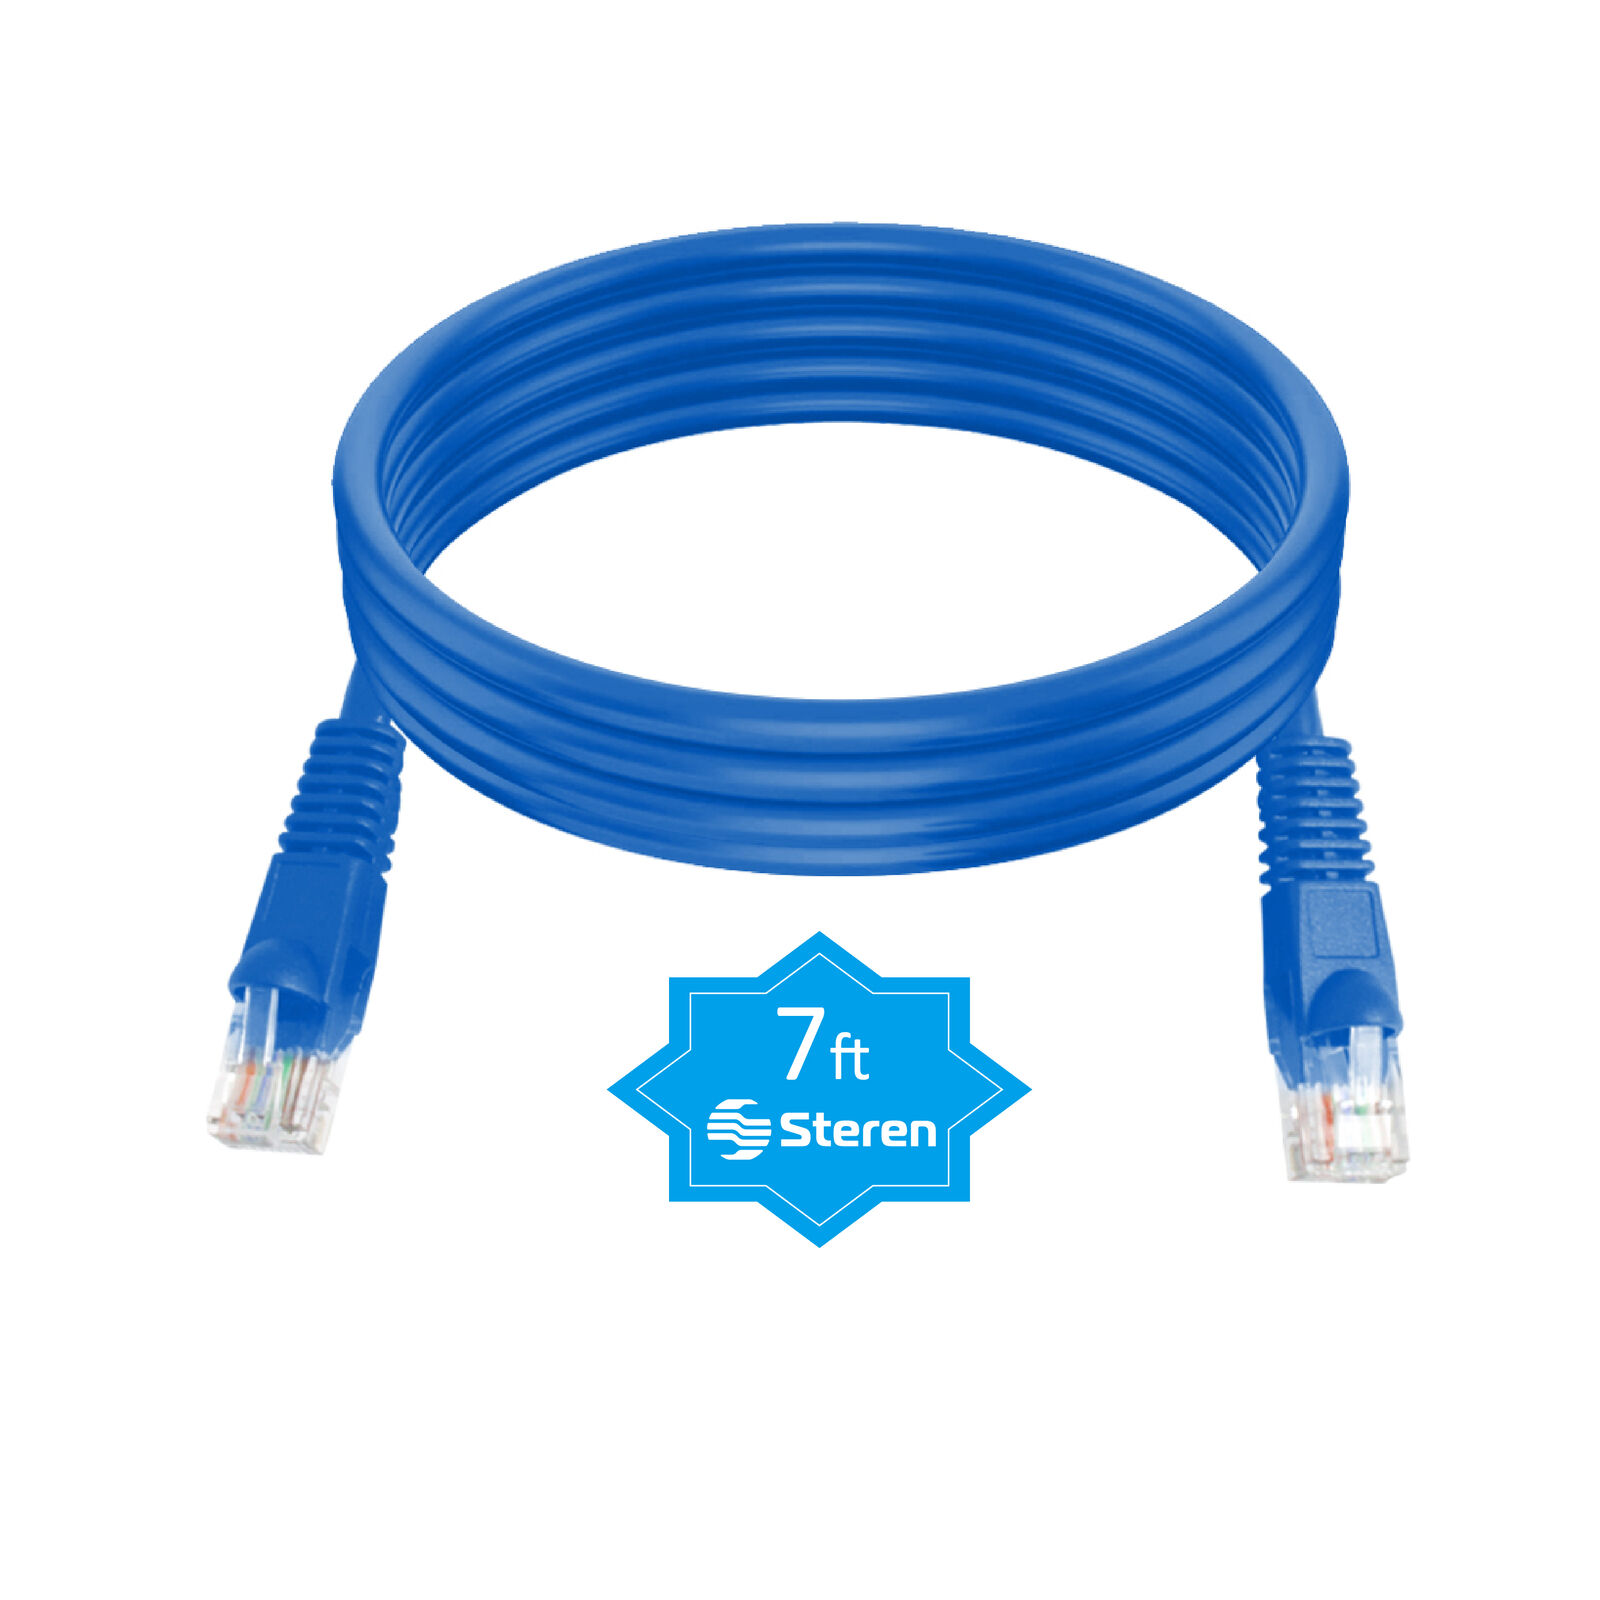 Steren 7ft Cat5e Patch Cord Non-Booted UTP cULus Blue